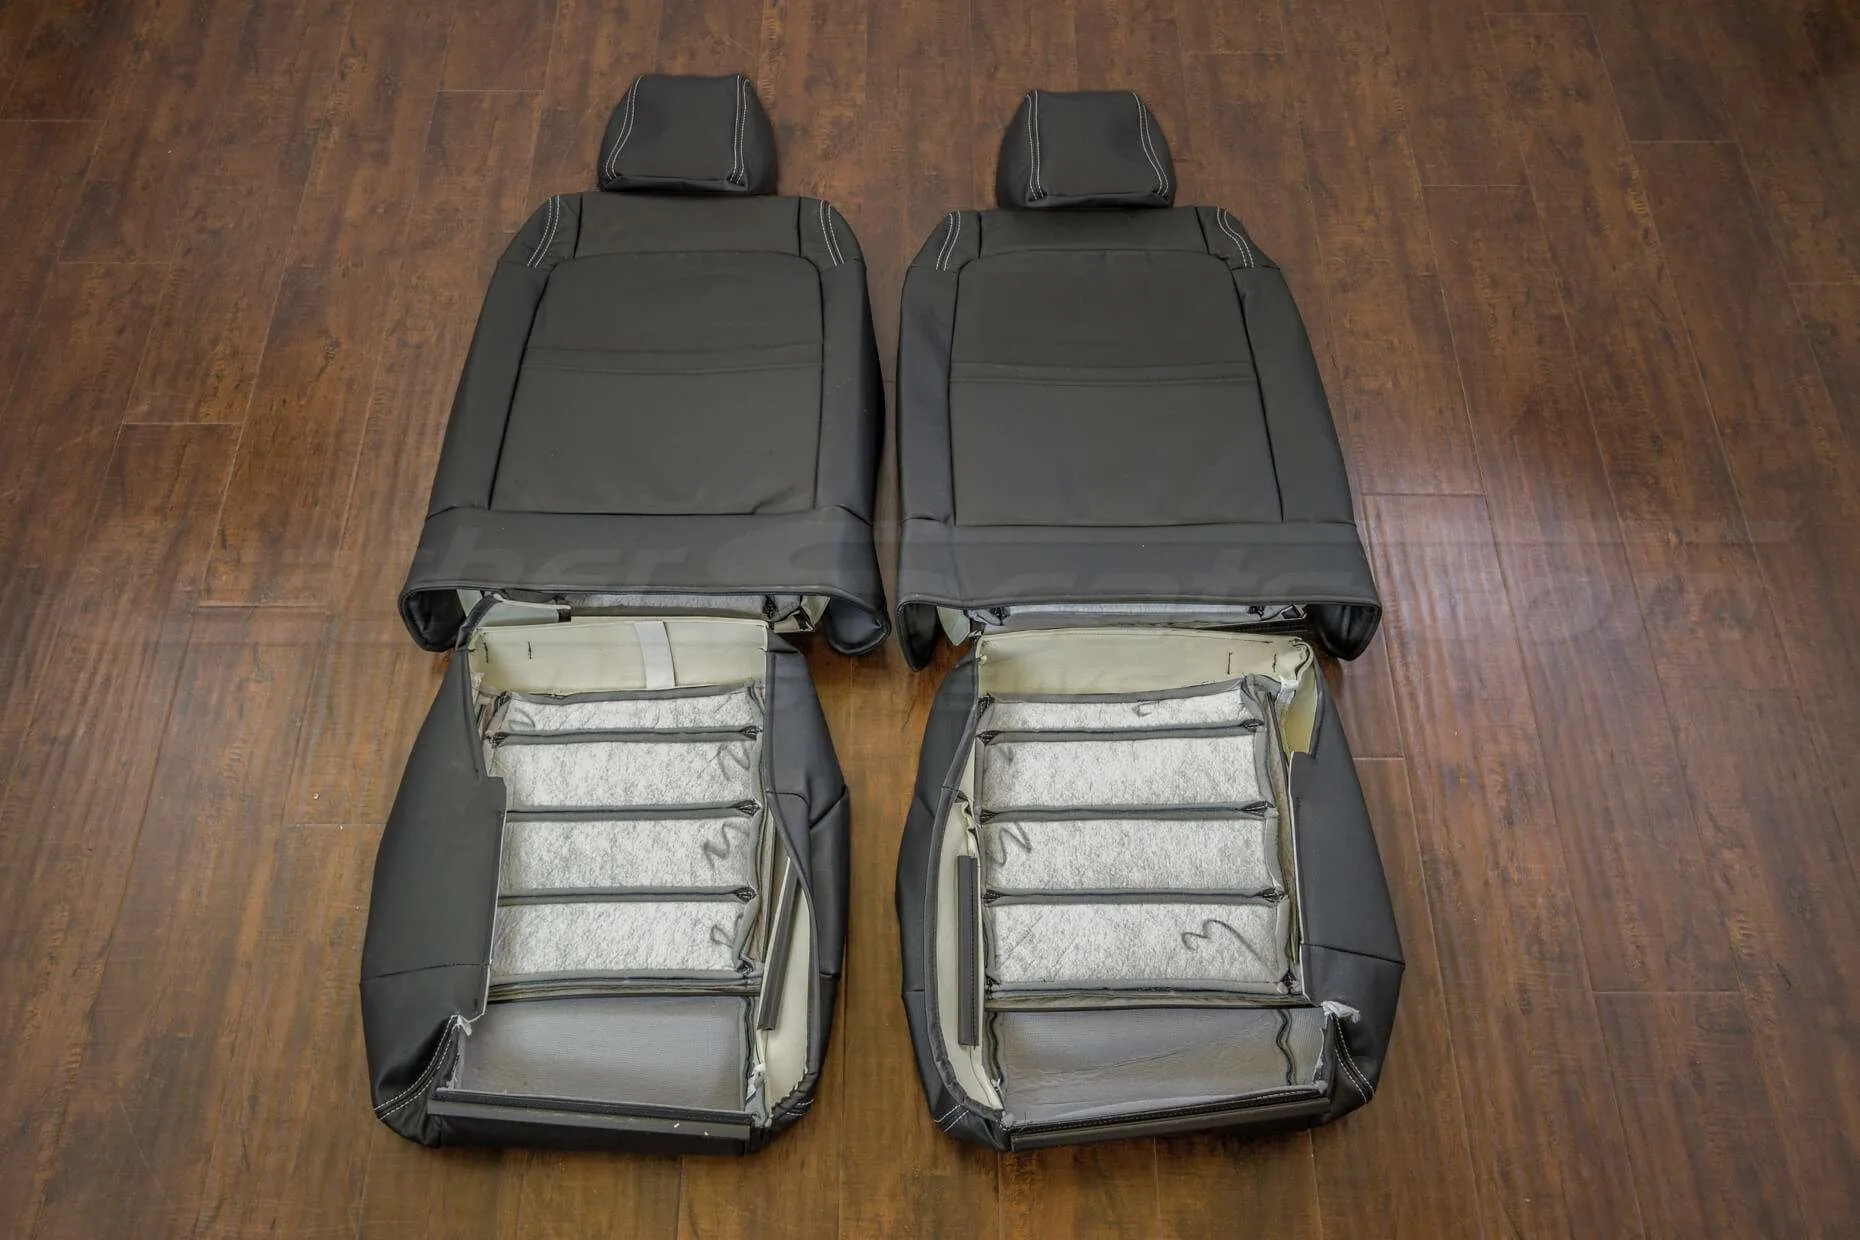 Jeep Wrangler Upholstery Kit - Black - Back view of front seats